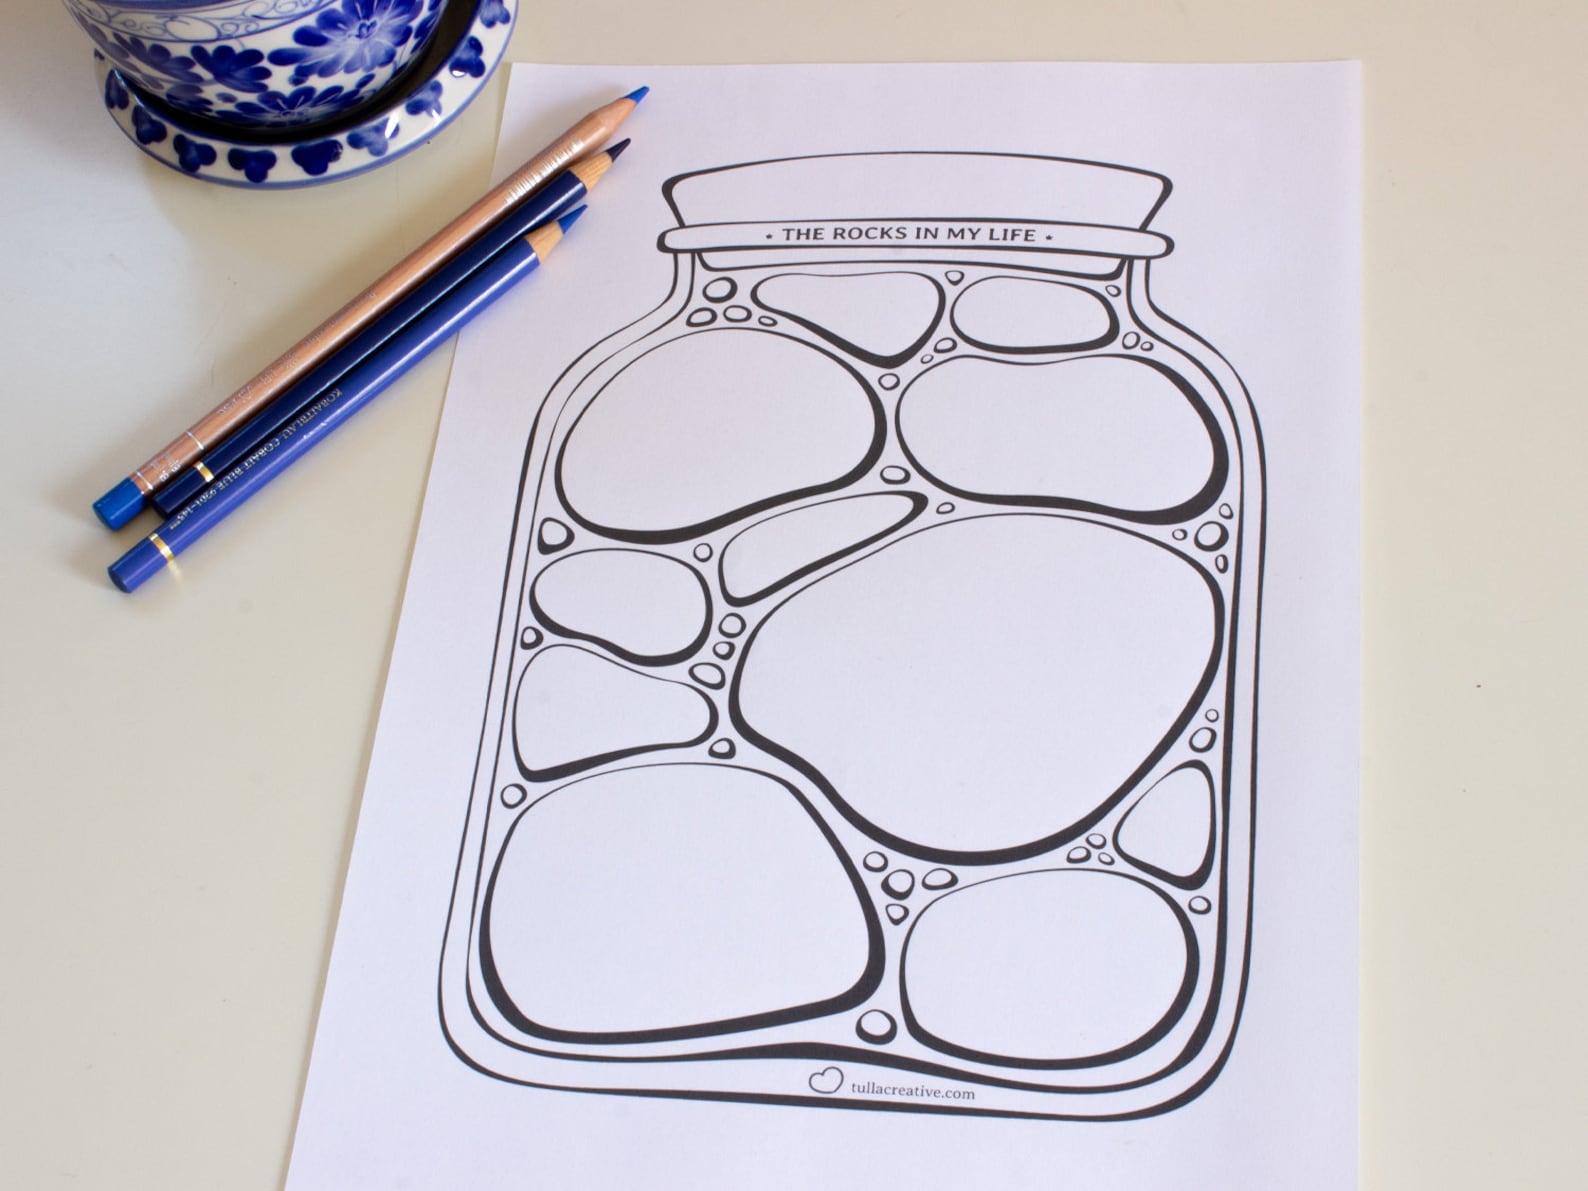 printable-jar-of-life-what-are-the-rocks-in-your-life-b-w-design